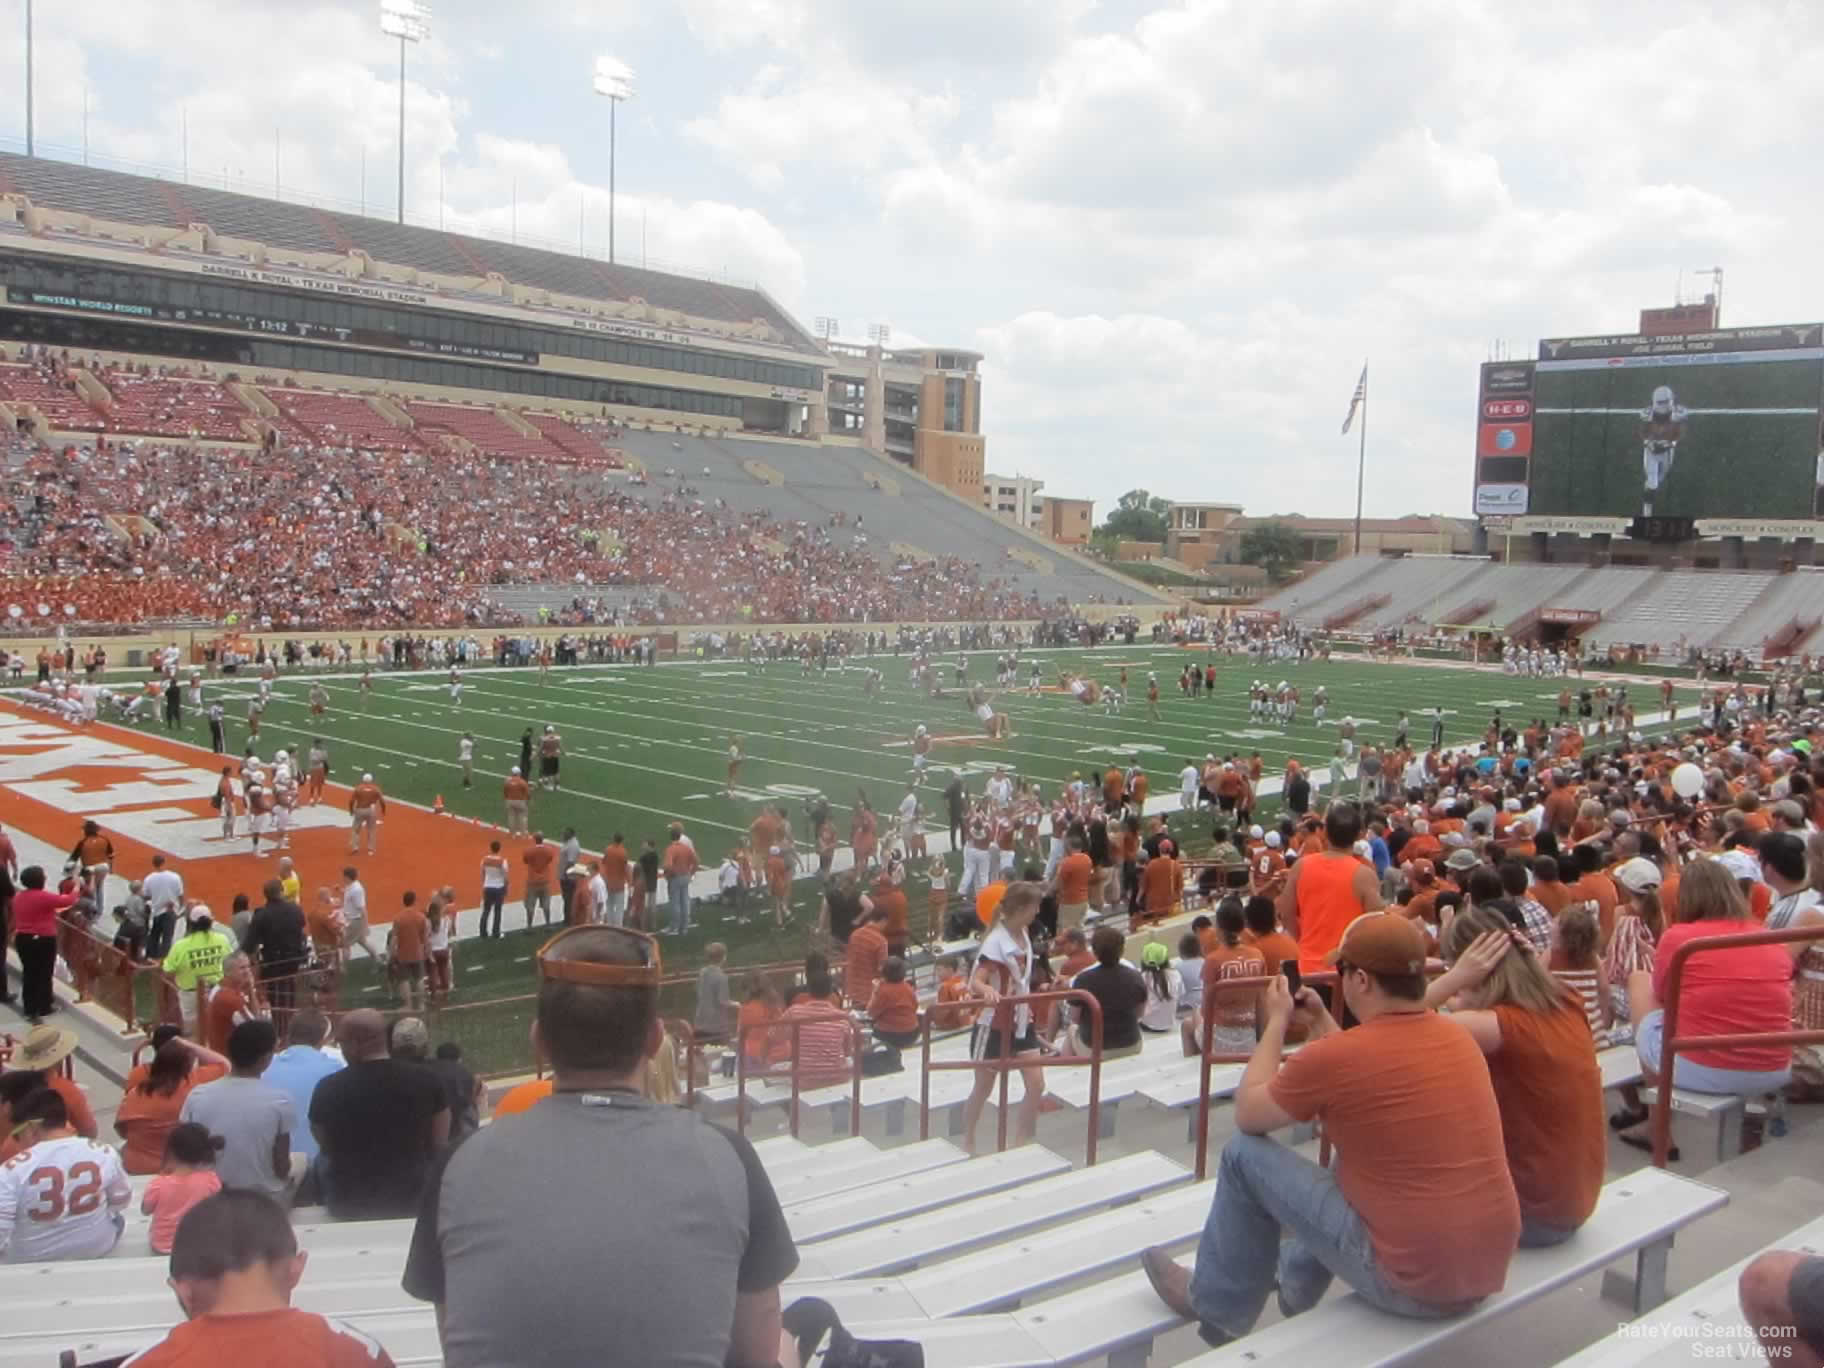 section 13, row 19 seat view  - dkr-texas memorial stadium